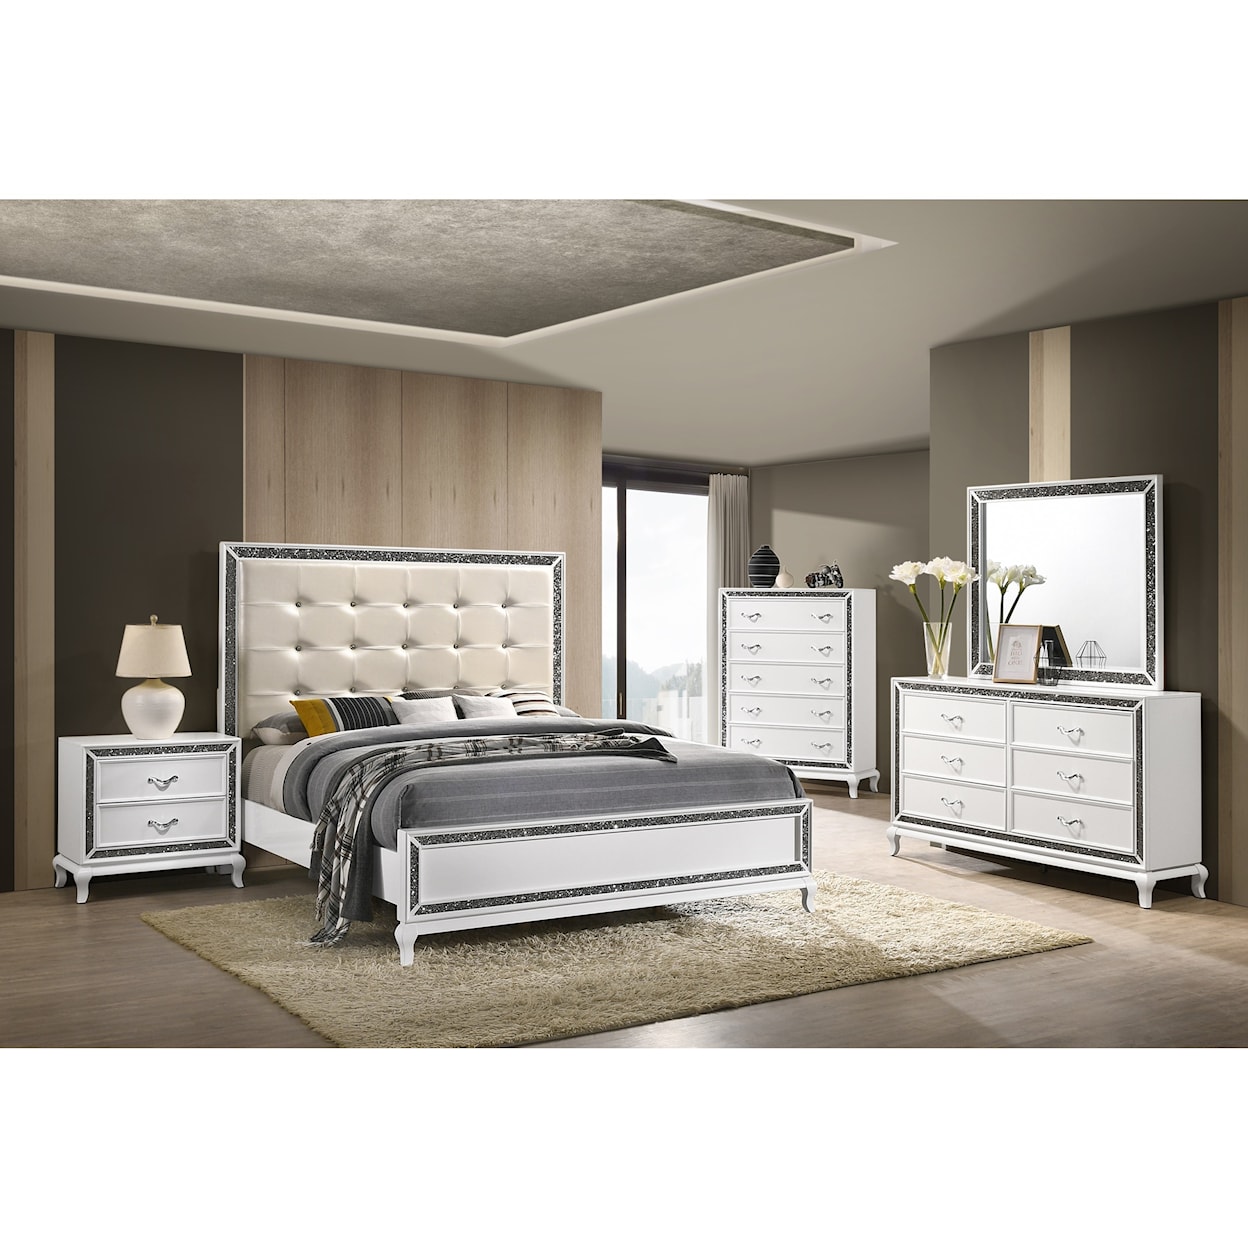 New Classic Furniture Park Imperial Queen Bedroom Group